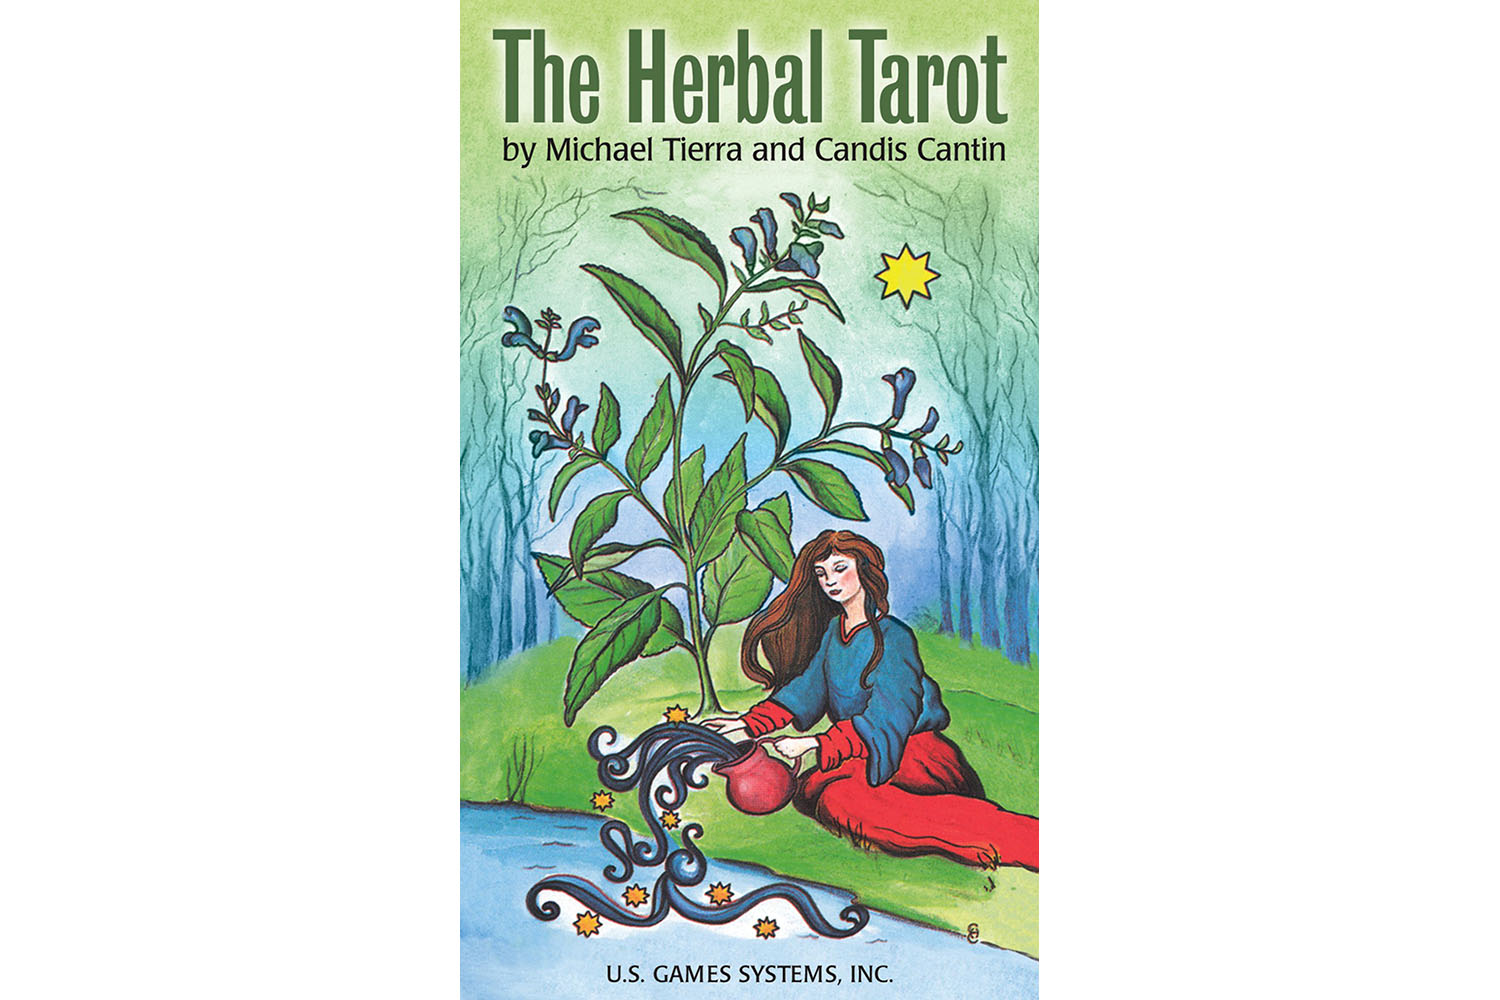 The Herbal Tarot by Michael Tierra and Candis Cantin